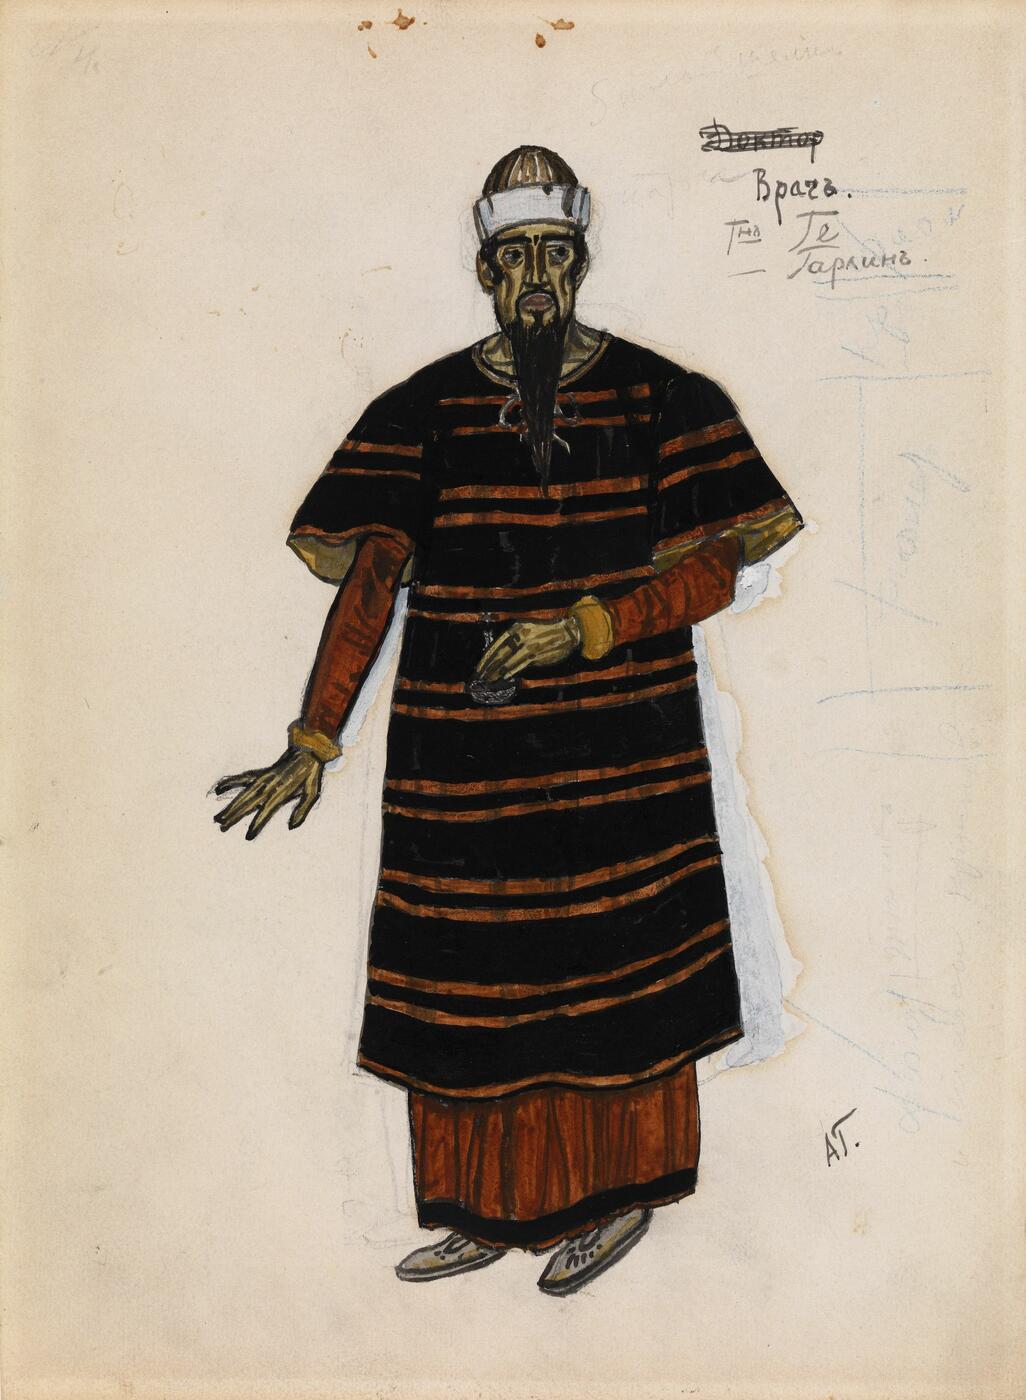 Costume Design for the Doctor from a Production of the Play "Peter Khlebnik" by Lev Tolstoy, directed by Vsevolod Meyerhold, Alexandrinsky Theatre, Petrograd, 1918